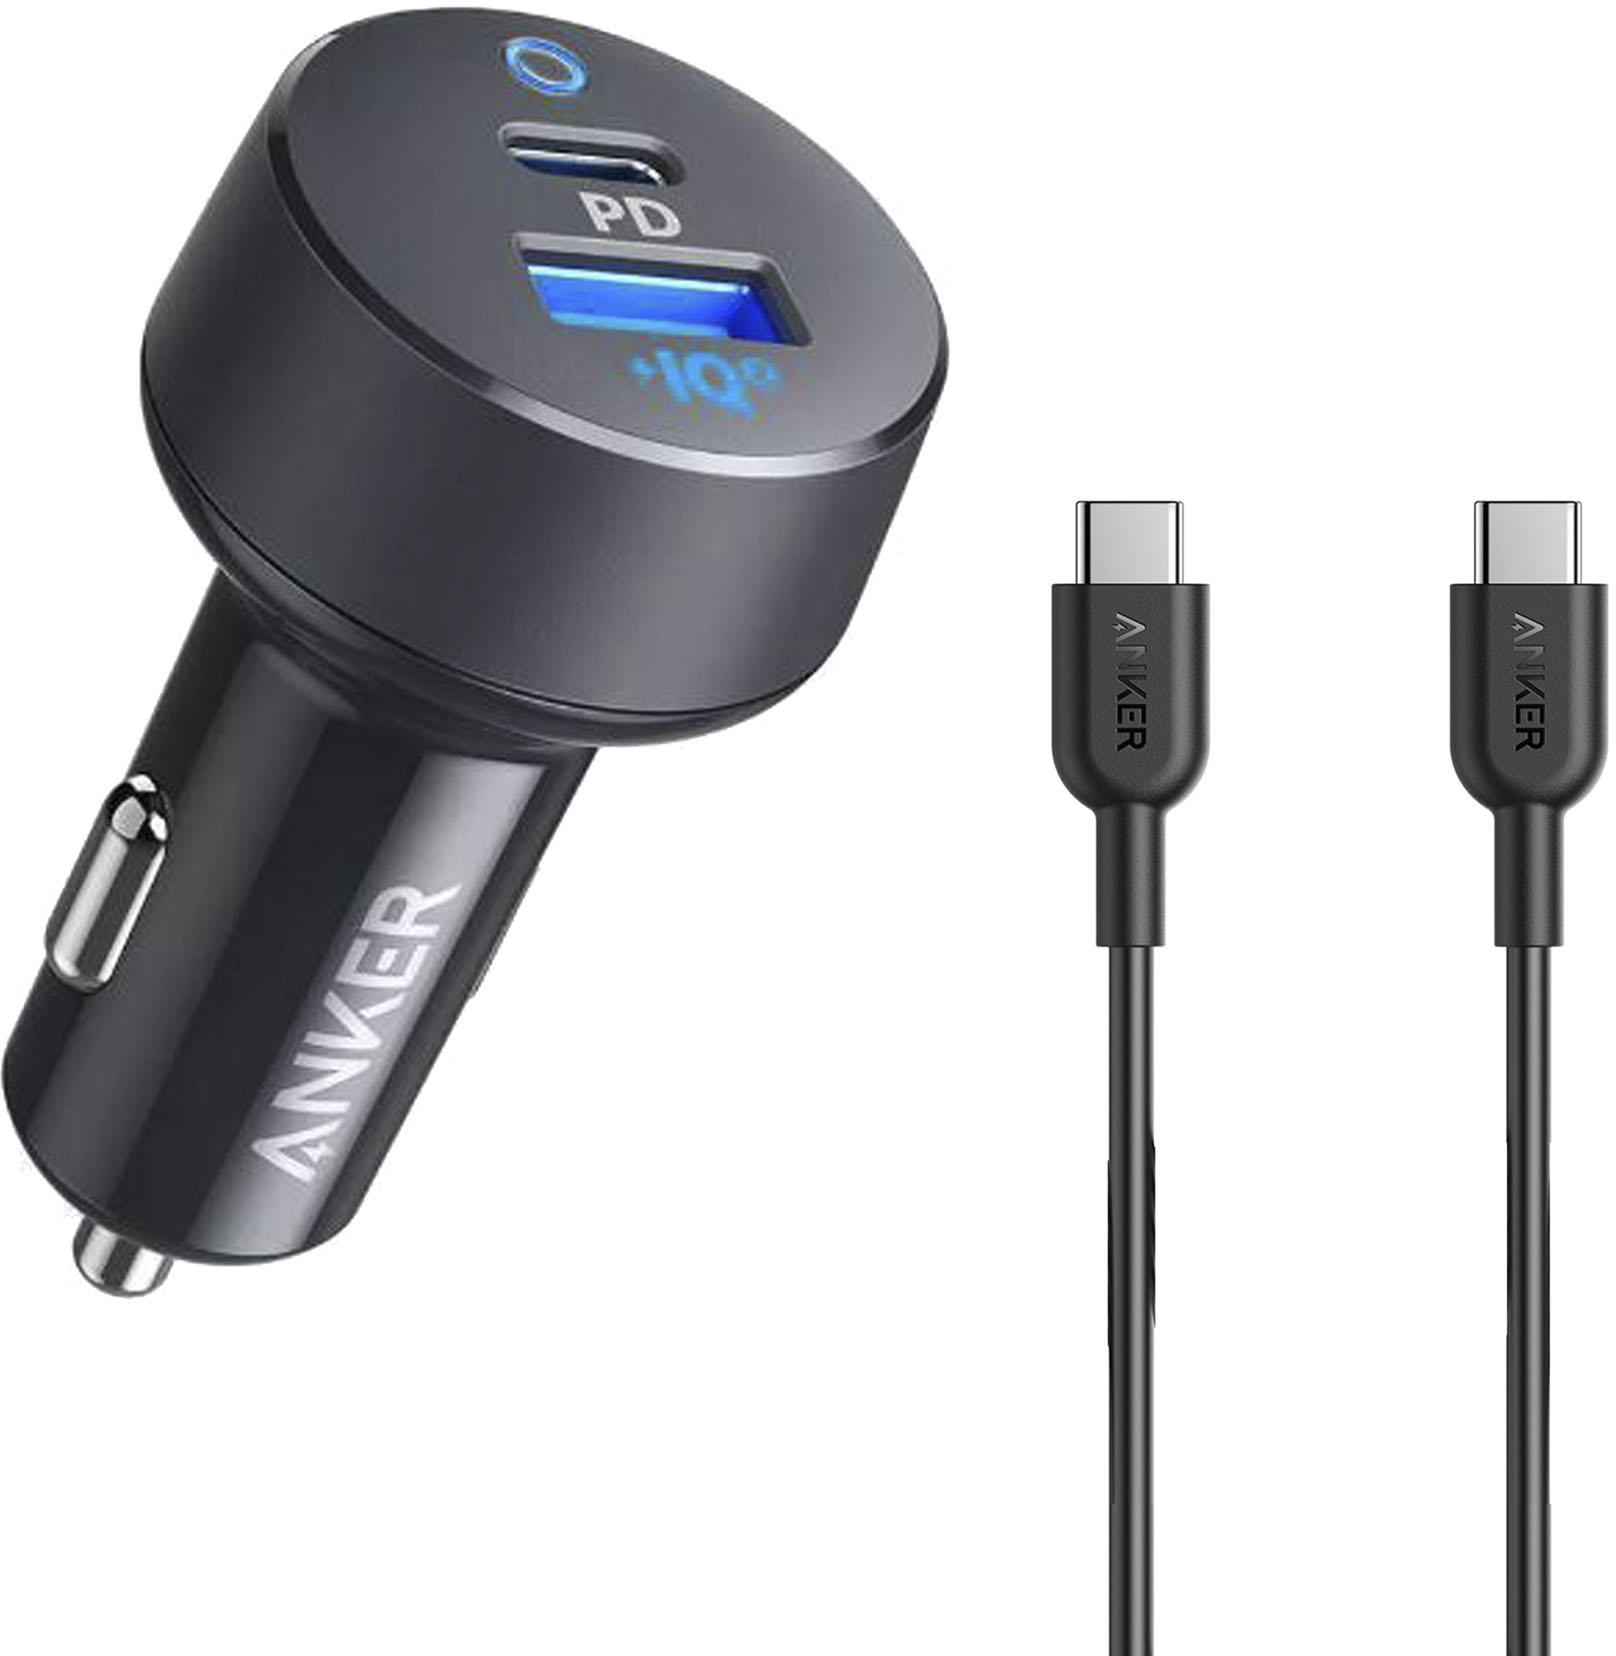 Anker PowerDrive+ 6ft USB-C Cable Dual USB Car Charger Black